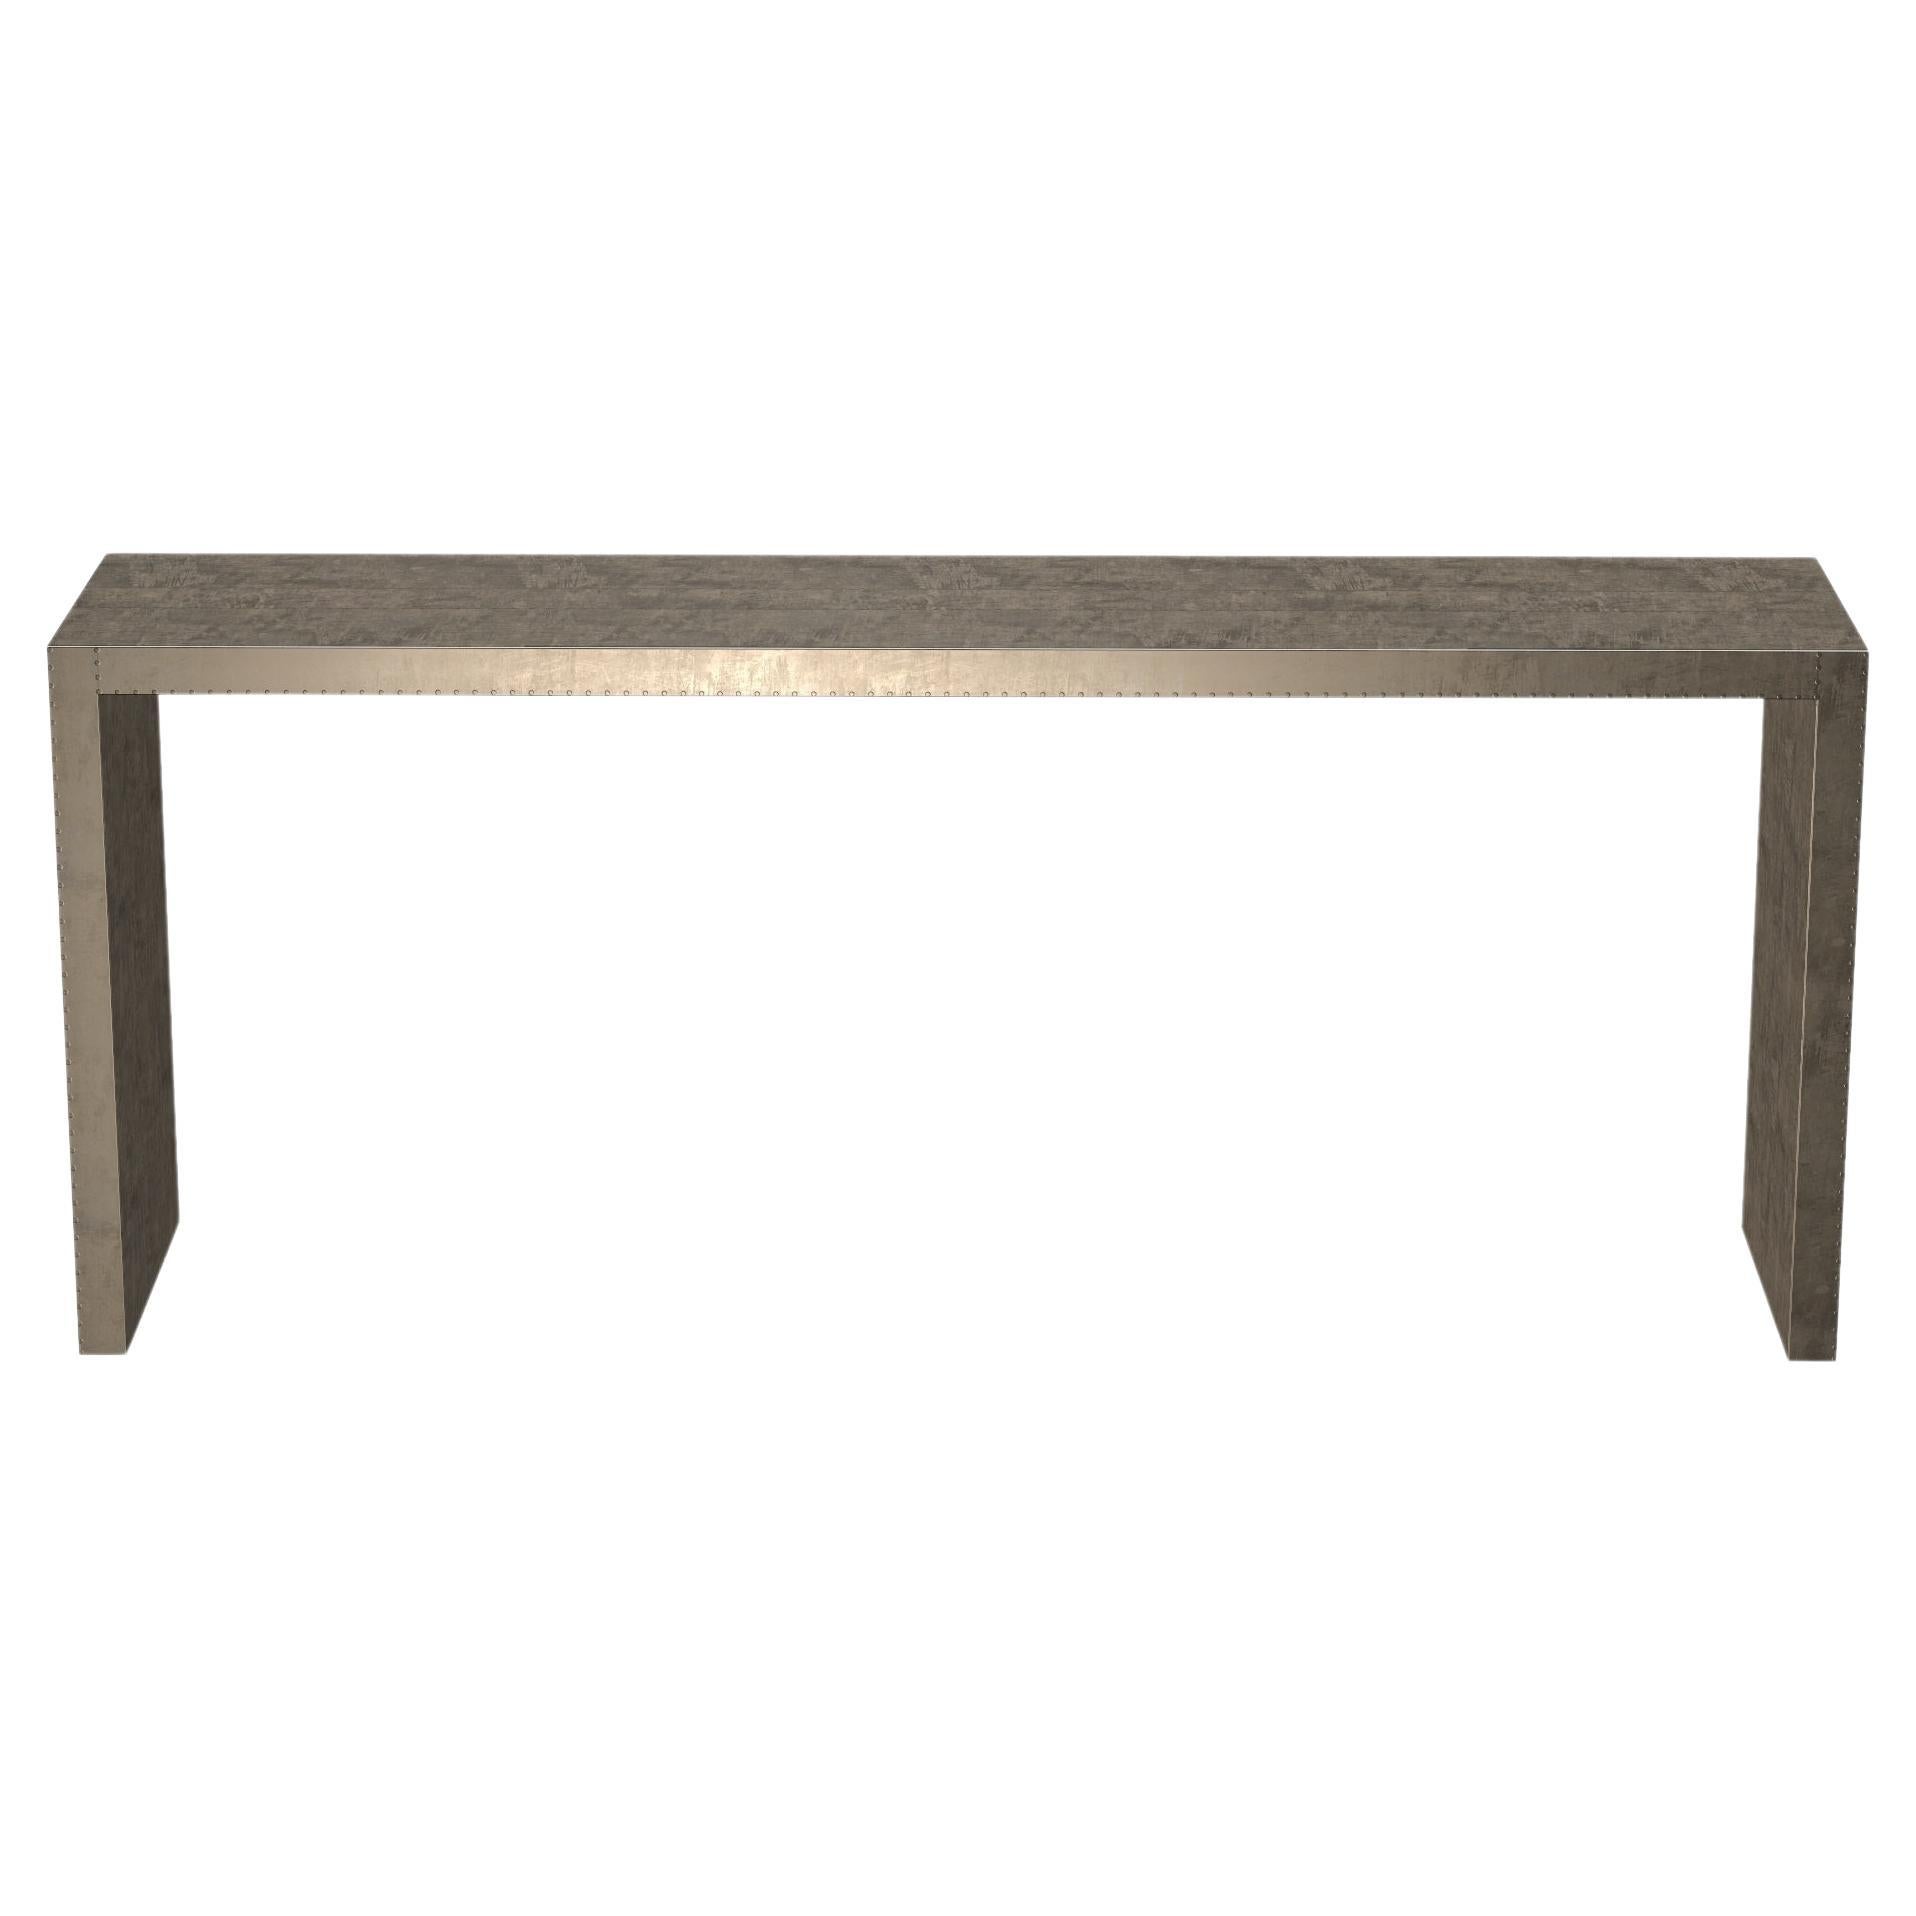 Art Deco Rectangular Console Tables in Smooth Antique Bronze by Alison Spear For Sale